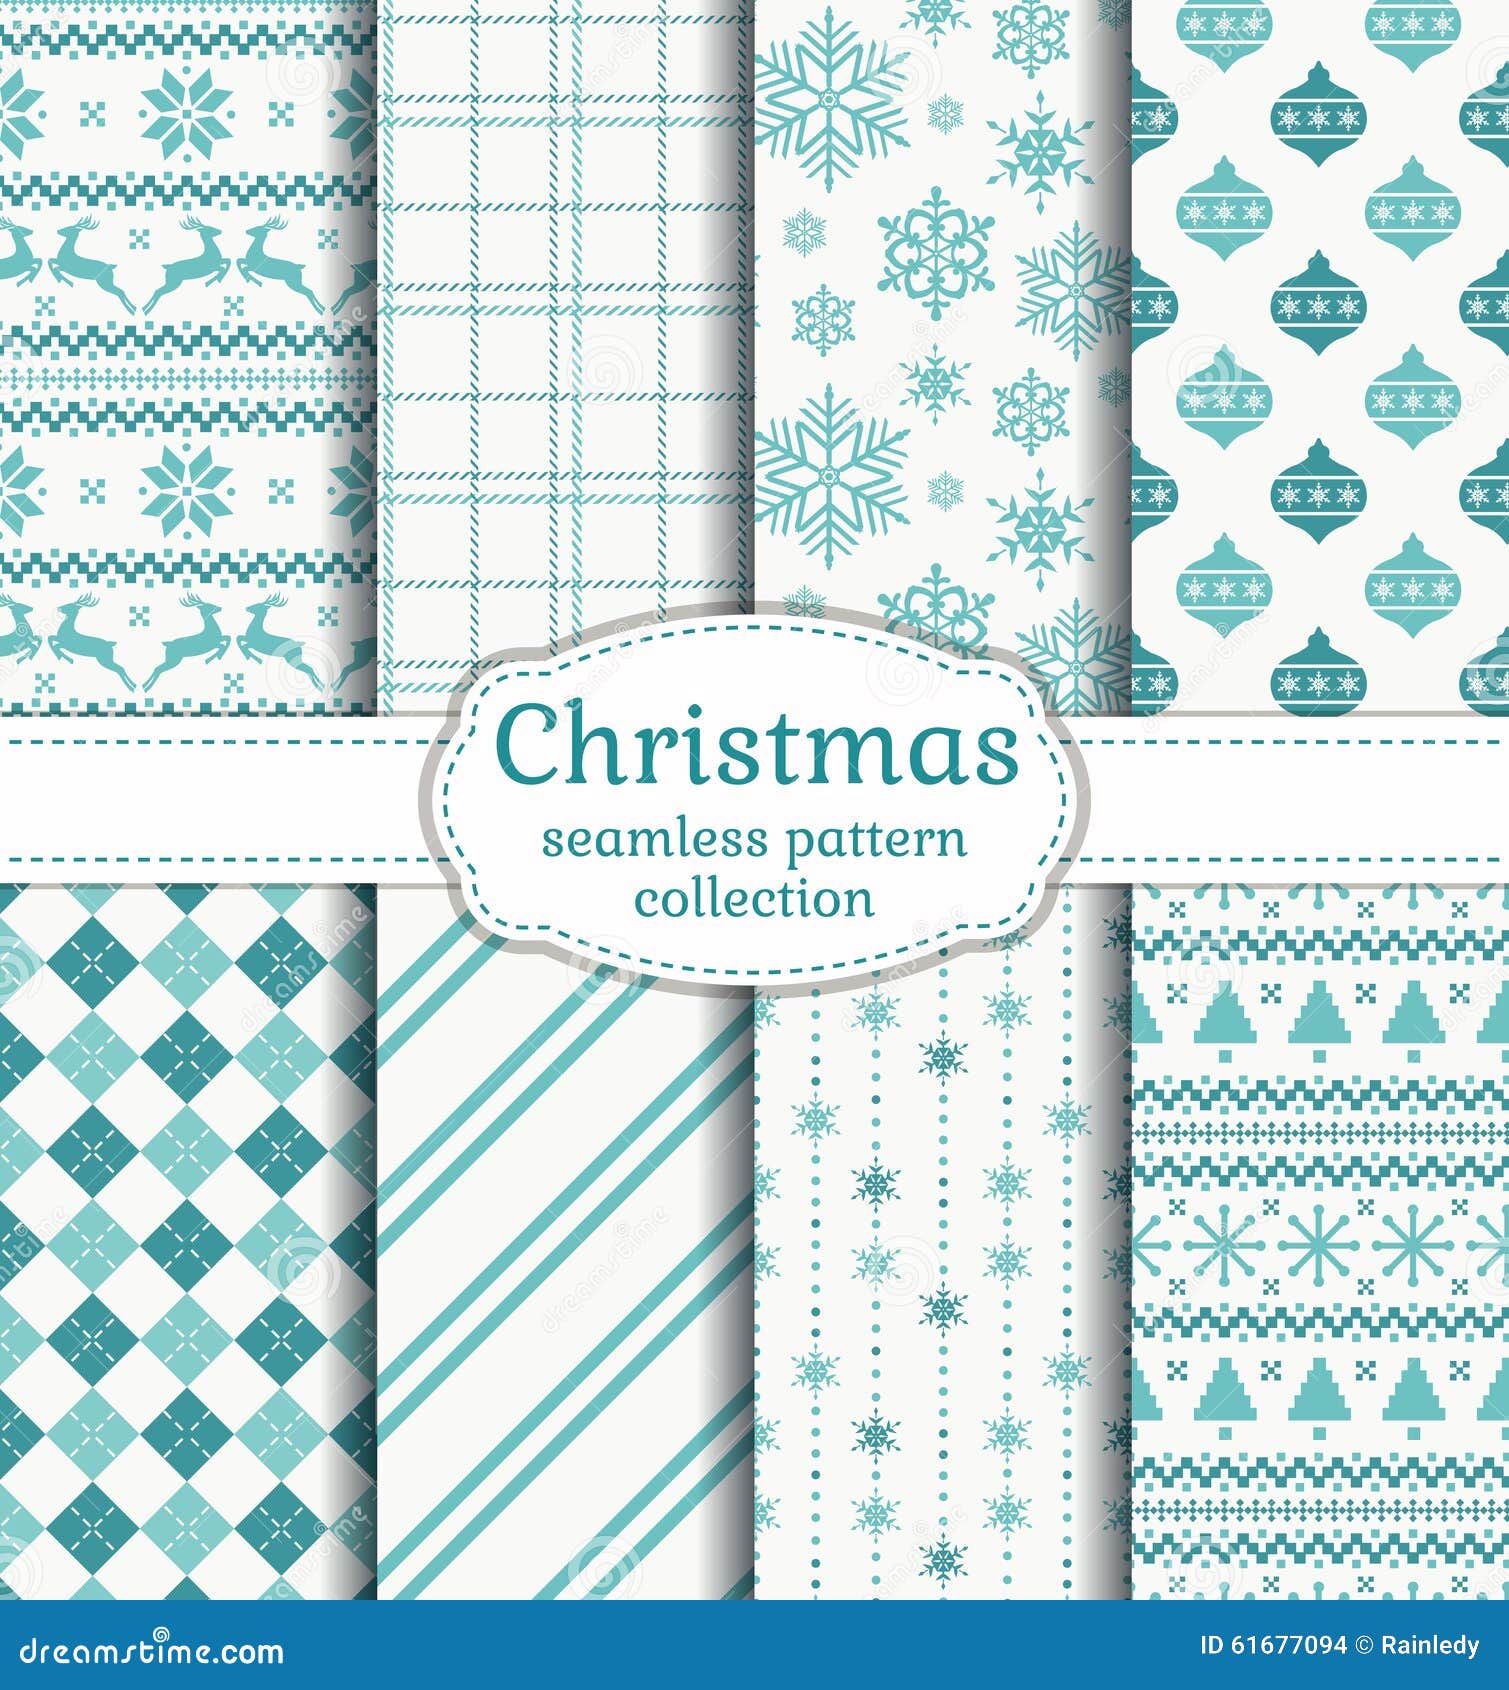 Seamless Plaid Checker Stripes Christmas Wrapping Paper Pattern In